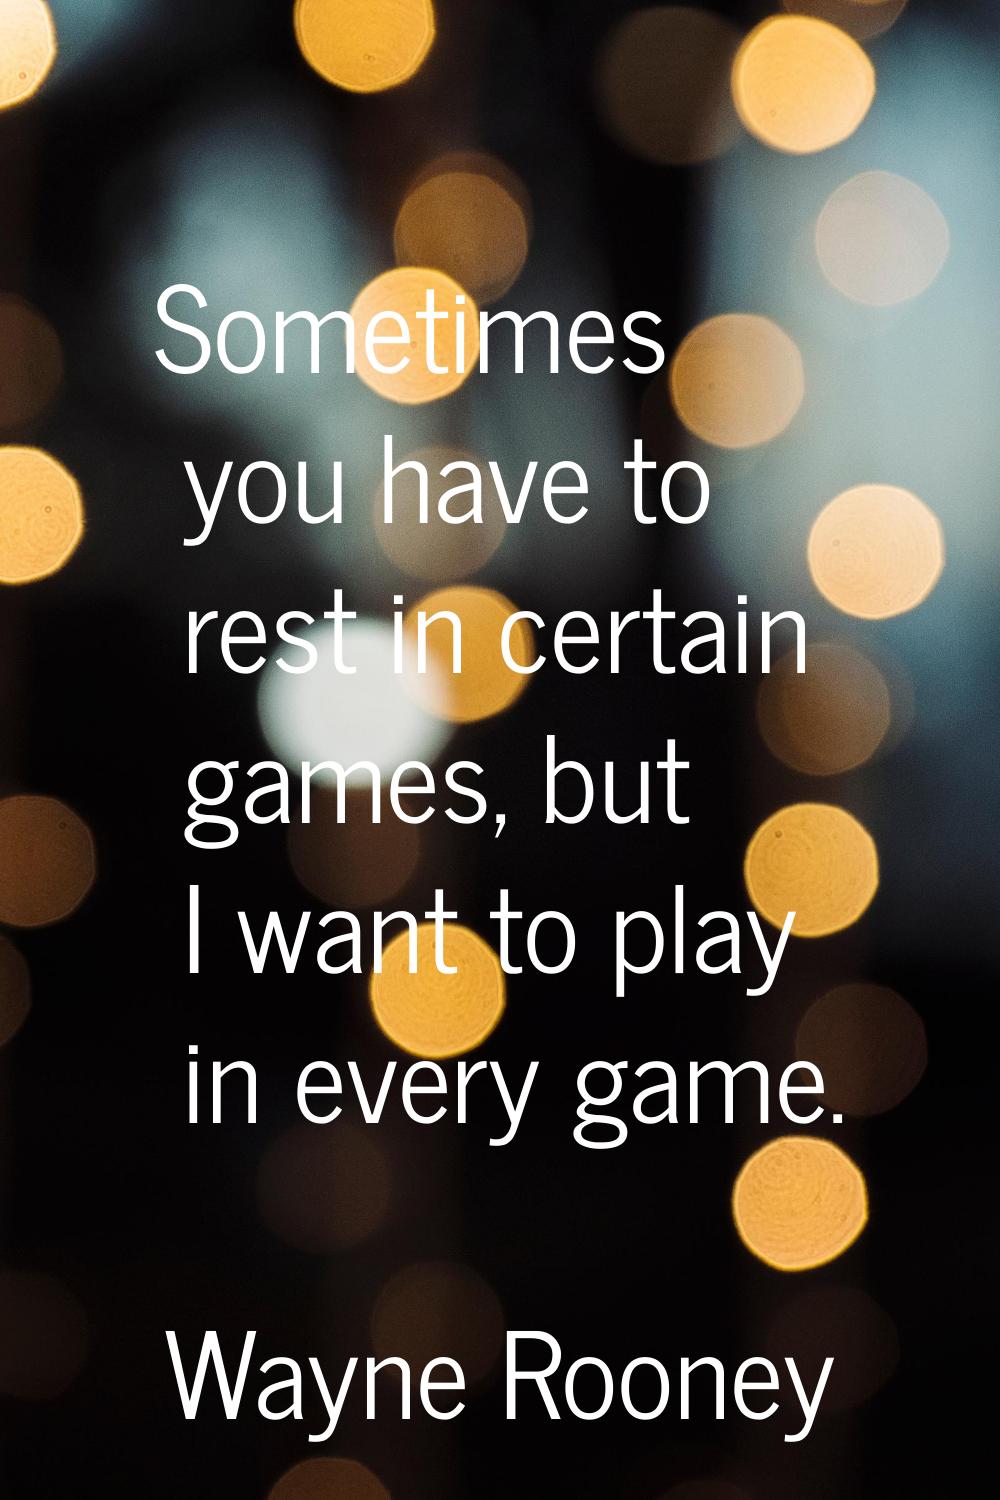 Sometimes you have to rest in certain games, but I want to play in every game.